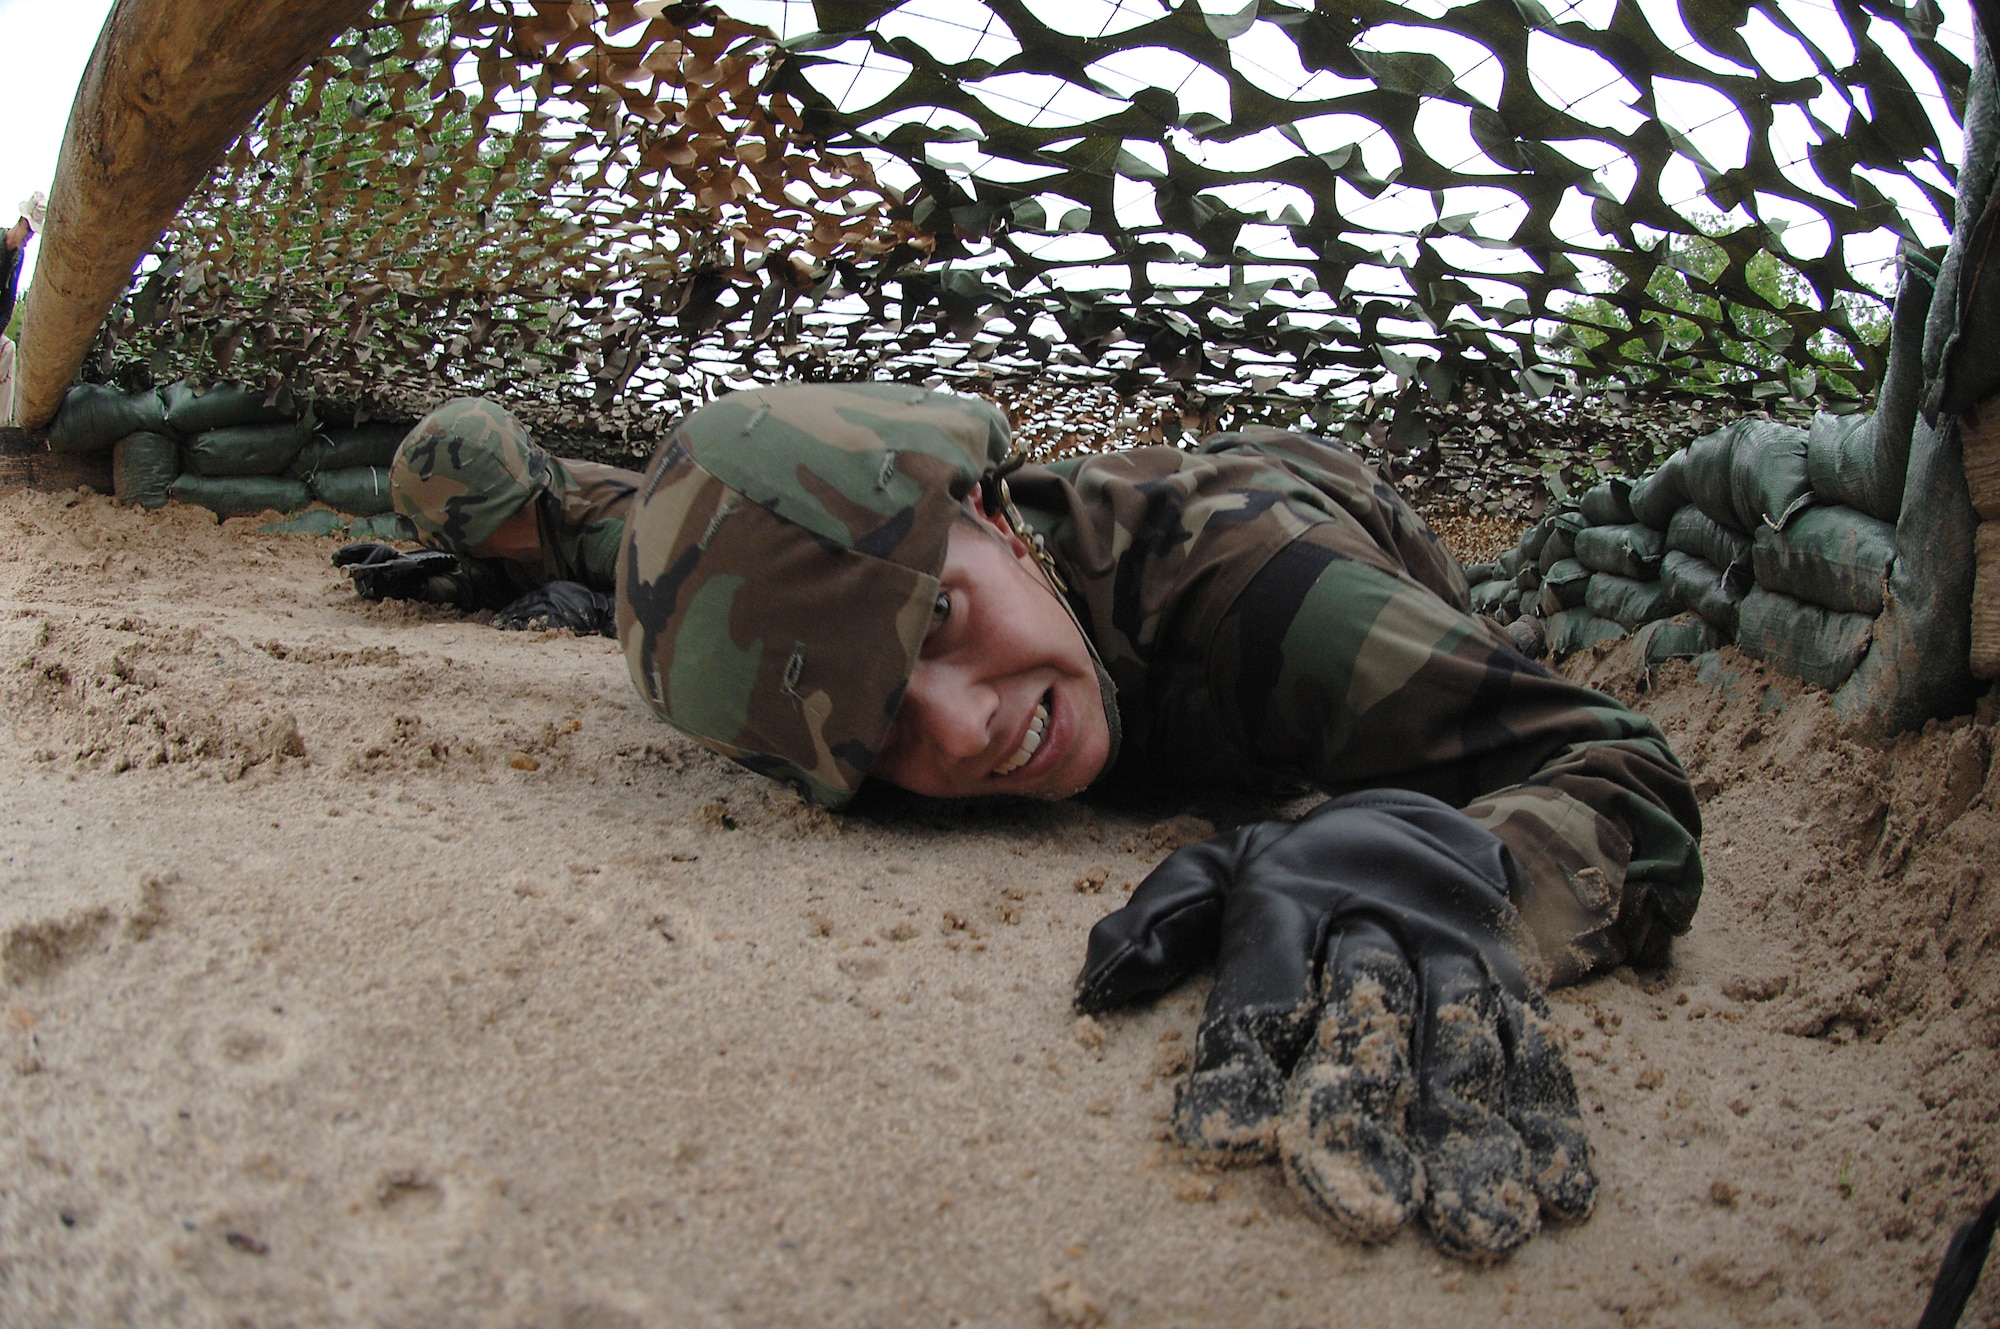 A basic trainee low crawls through the first obstacle of the tactical assault course at the field training site on Lackland Air Force Base, Texas on May 2. This half-mile course, consisting of numerous obstacles, tests the trainees' newly-acquired defensive tactics skills and enforces the need to properly communicate with their wingmen. (U.S. Air Force photo/Tech. Sgt. Larry A. Simmons)